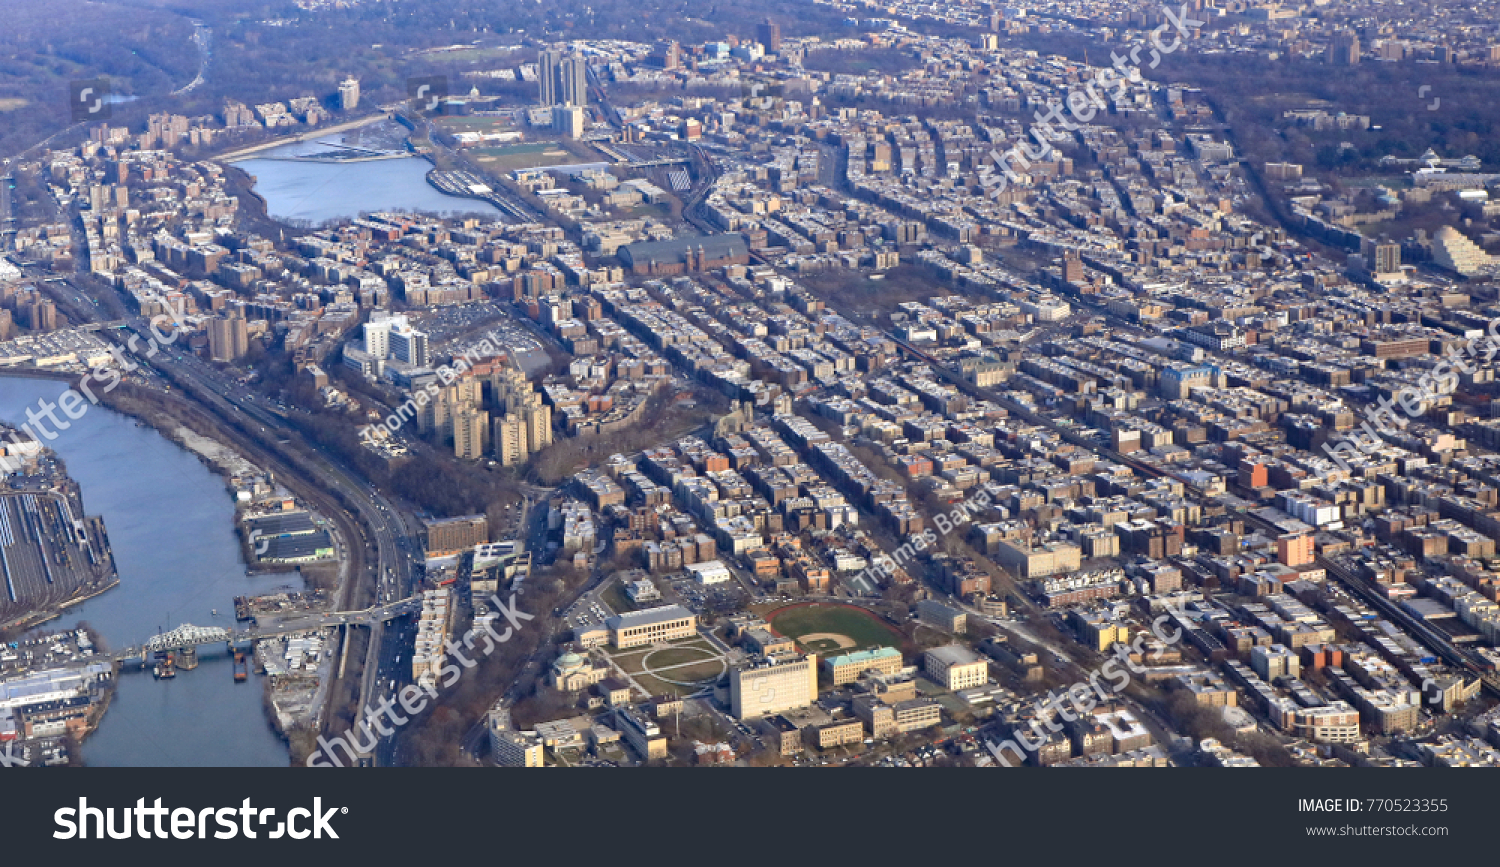 Aerial view of the Bronx in New York City, with Fordham and Kingsbridge plus the Harlem River. #770523355